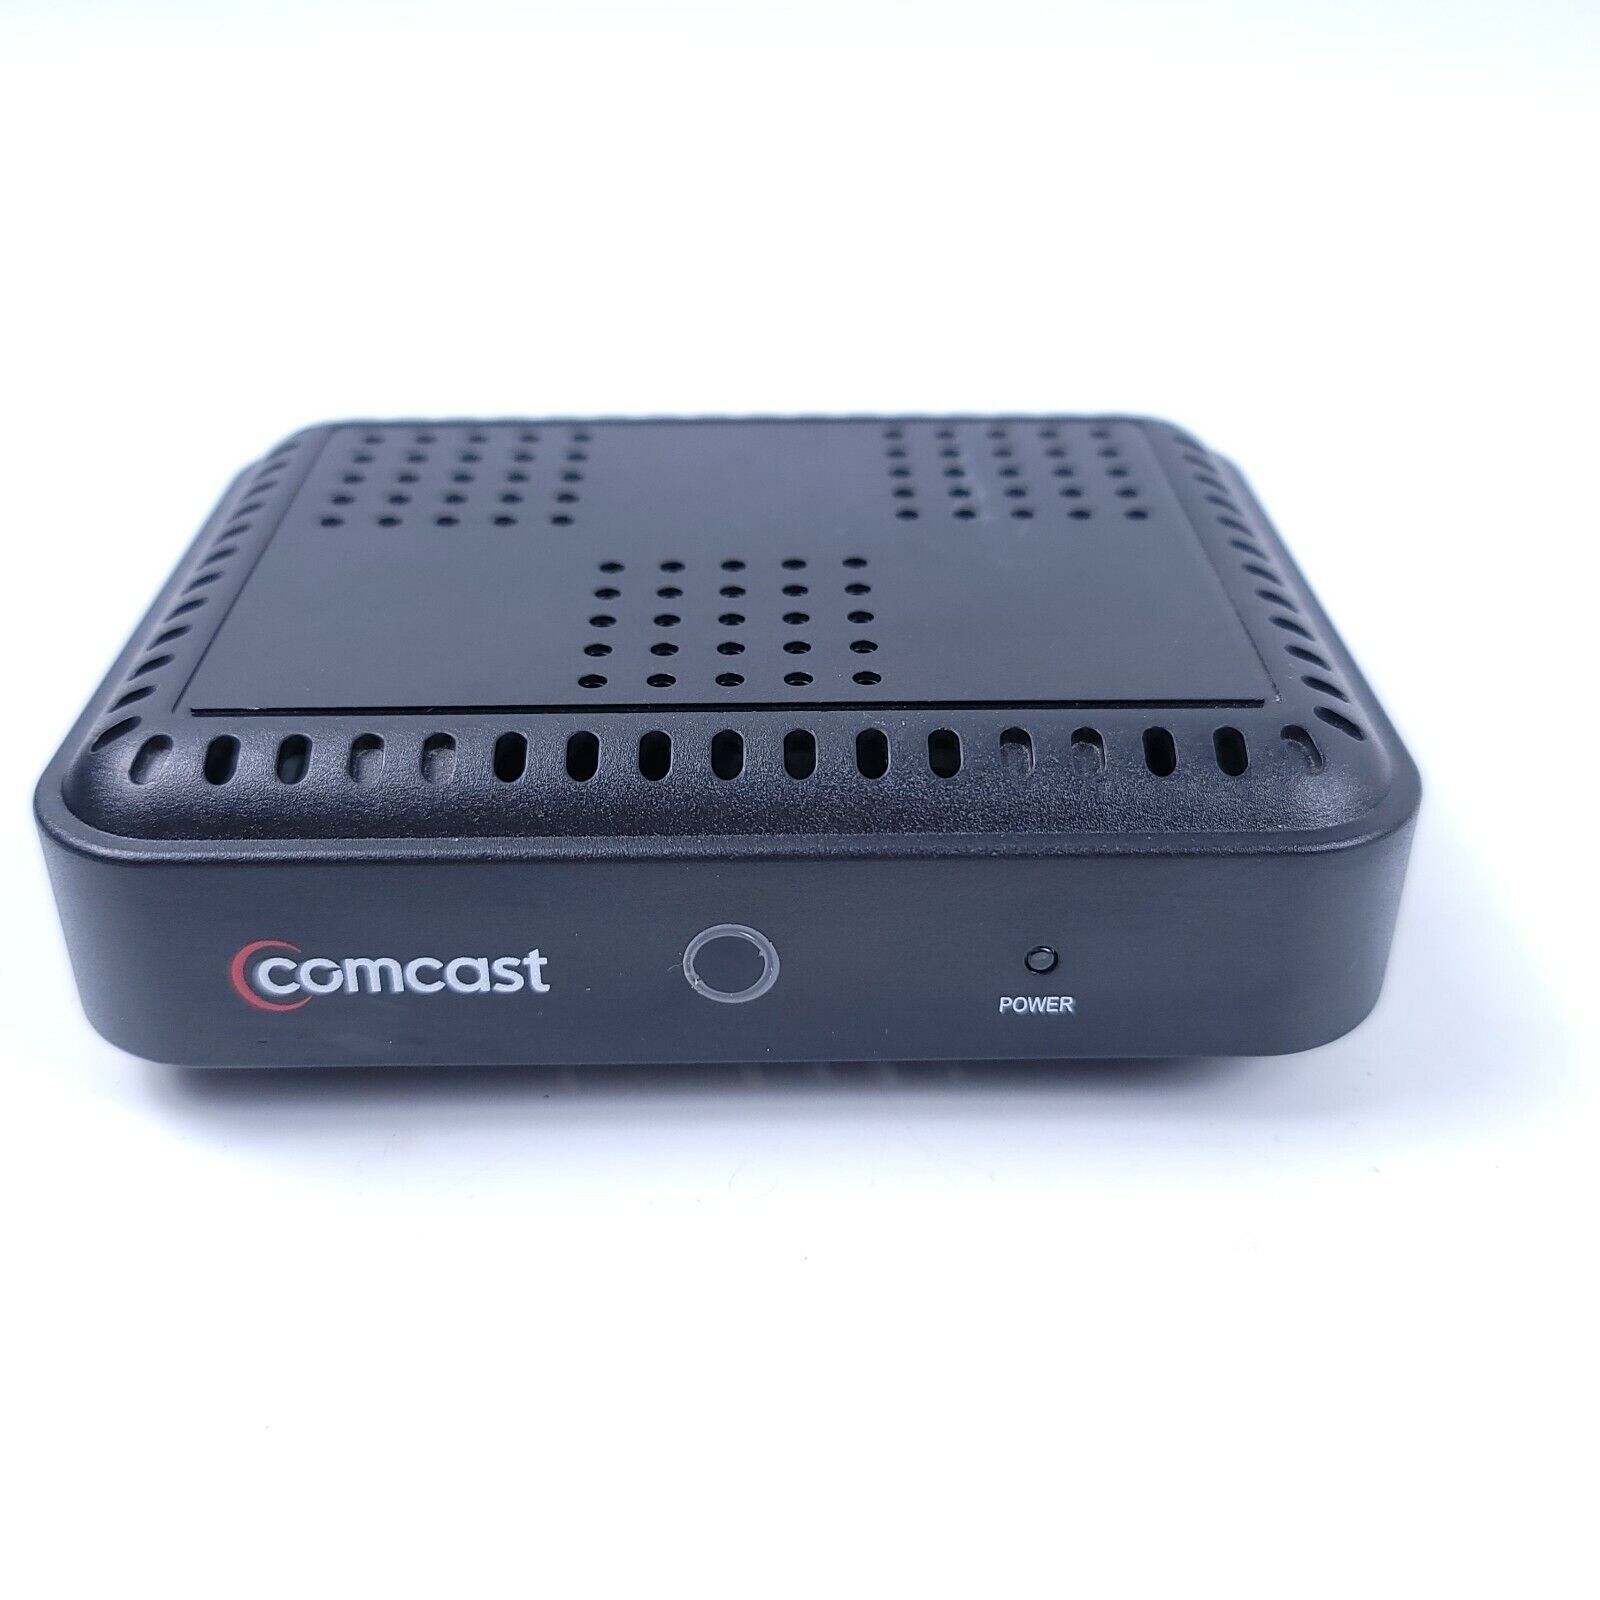 Large-scale sale Comcast DCi1011COM Cable Box No - Fast Shipping Cords Max 76% OFF